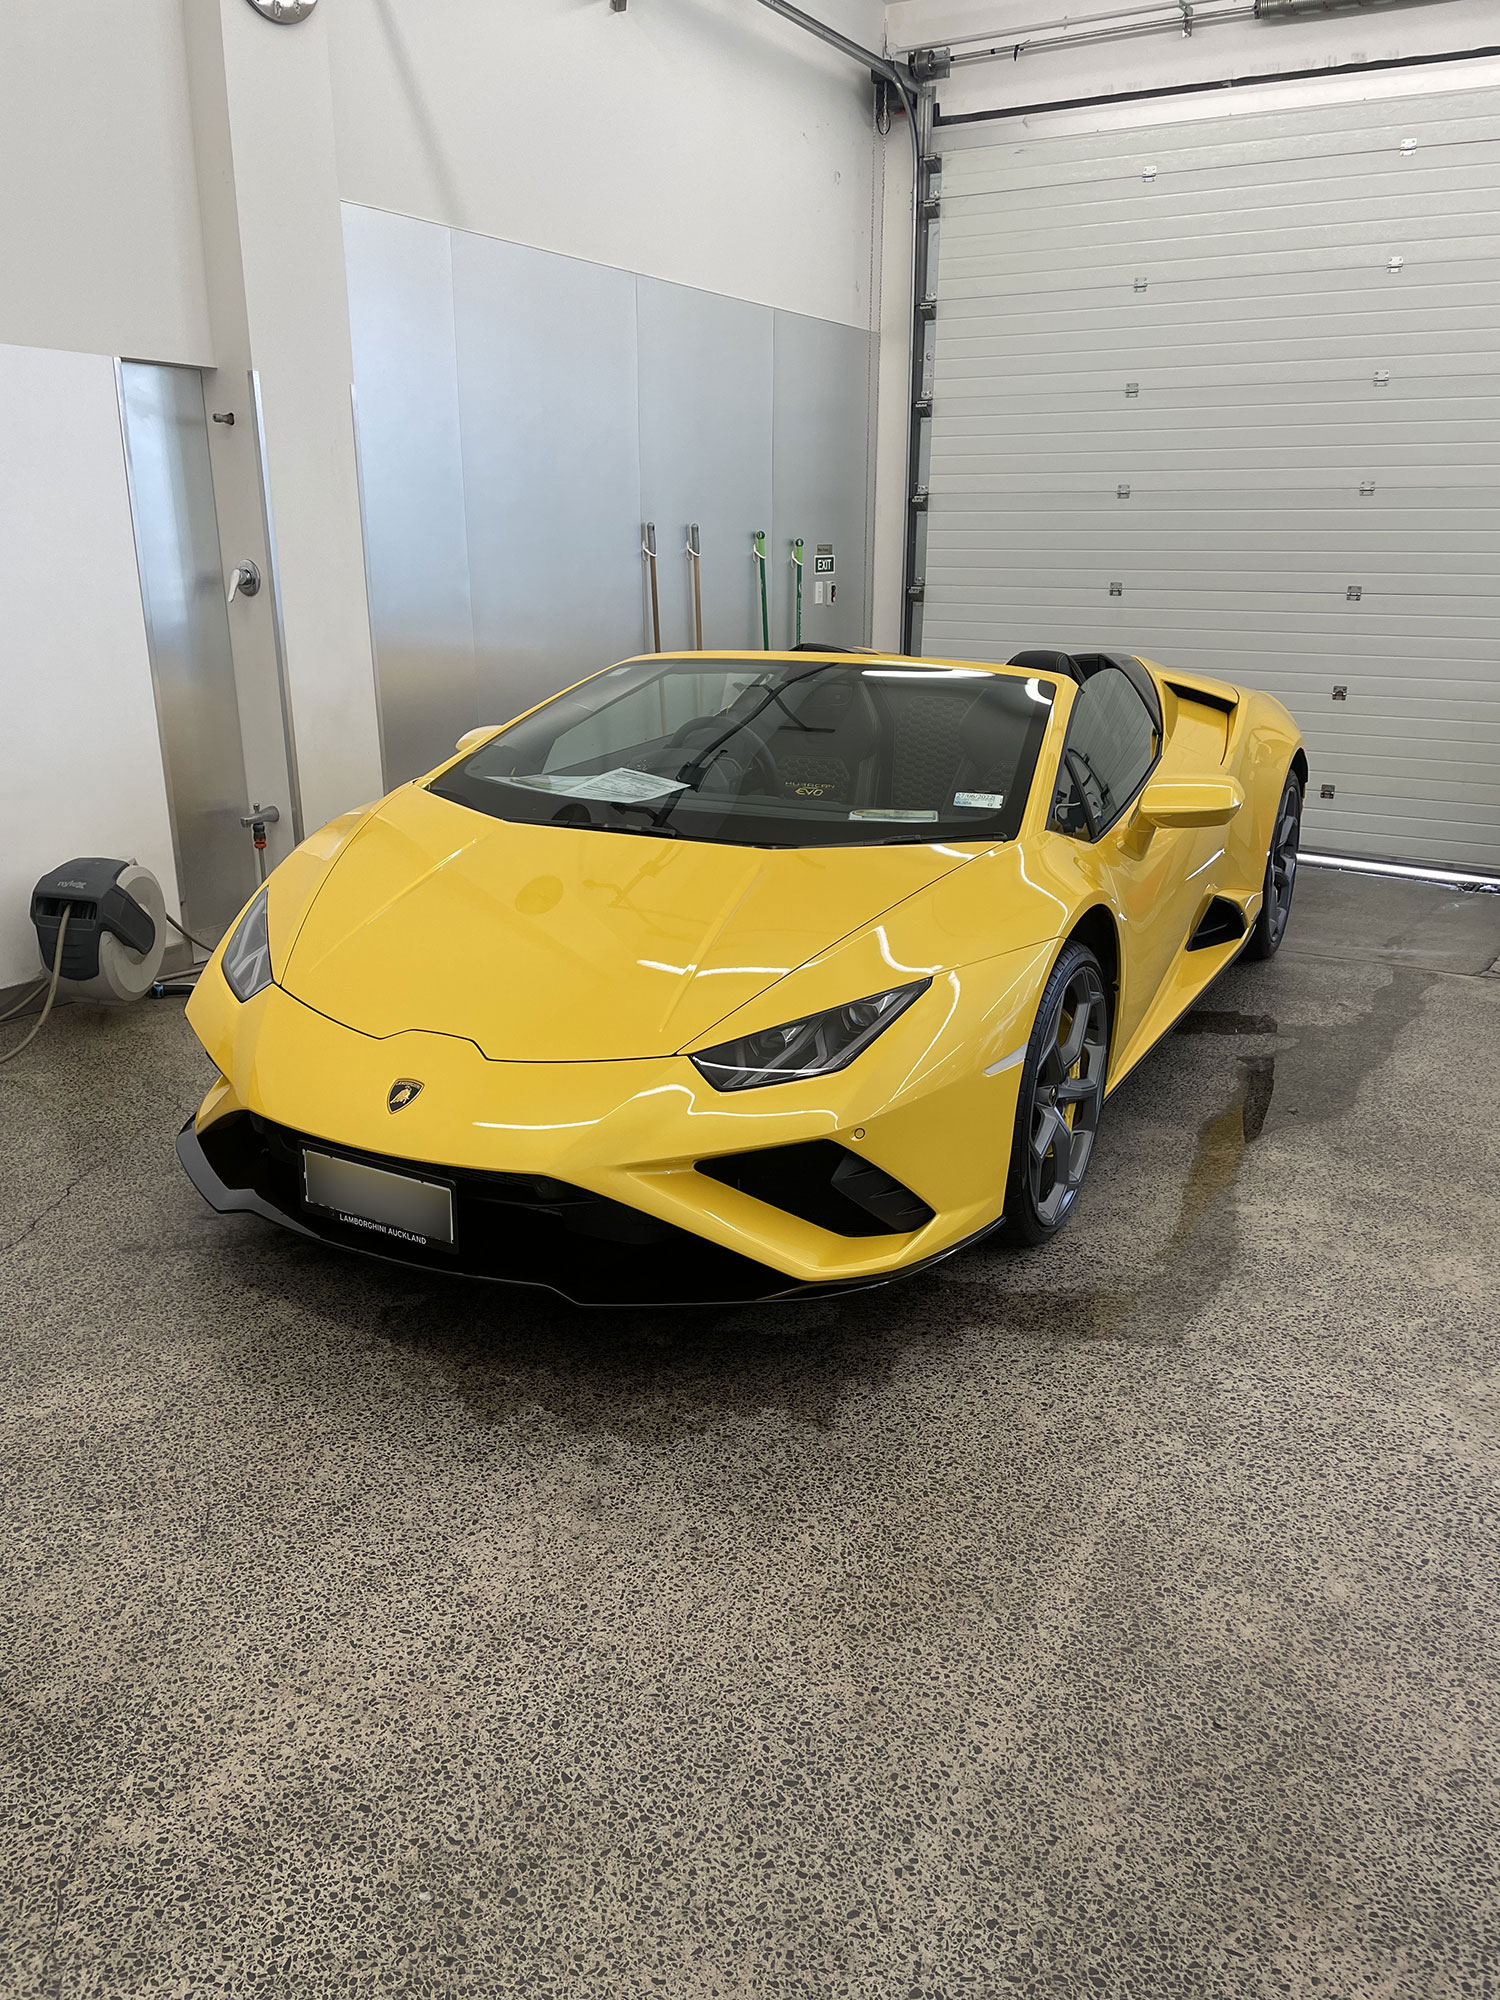 ProTect paint protection and car detailing specialists in aukcland new zeland window and headlight tinting ceramic coating services gal 21 new